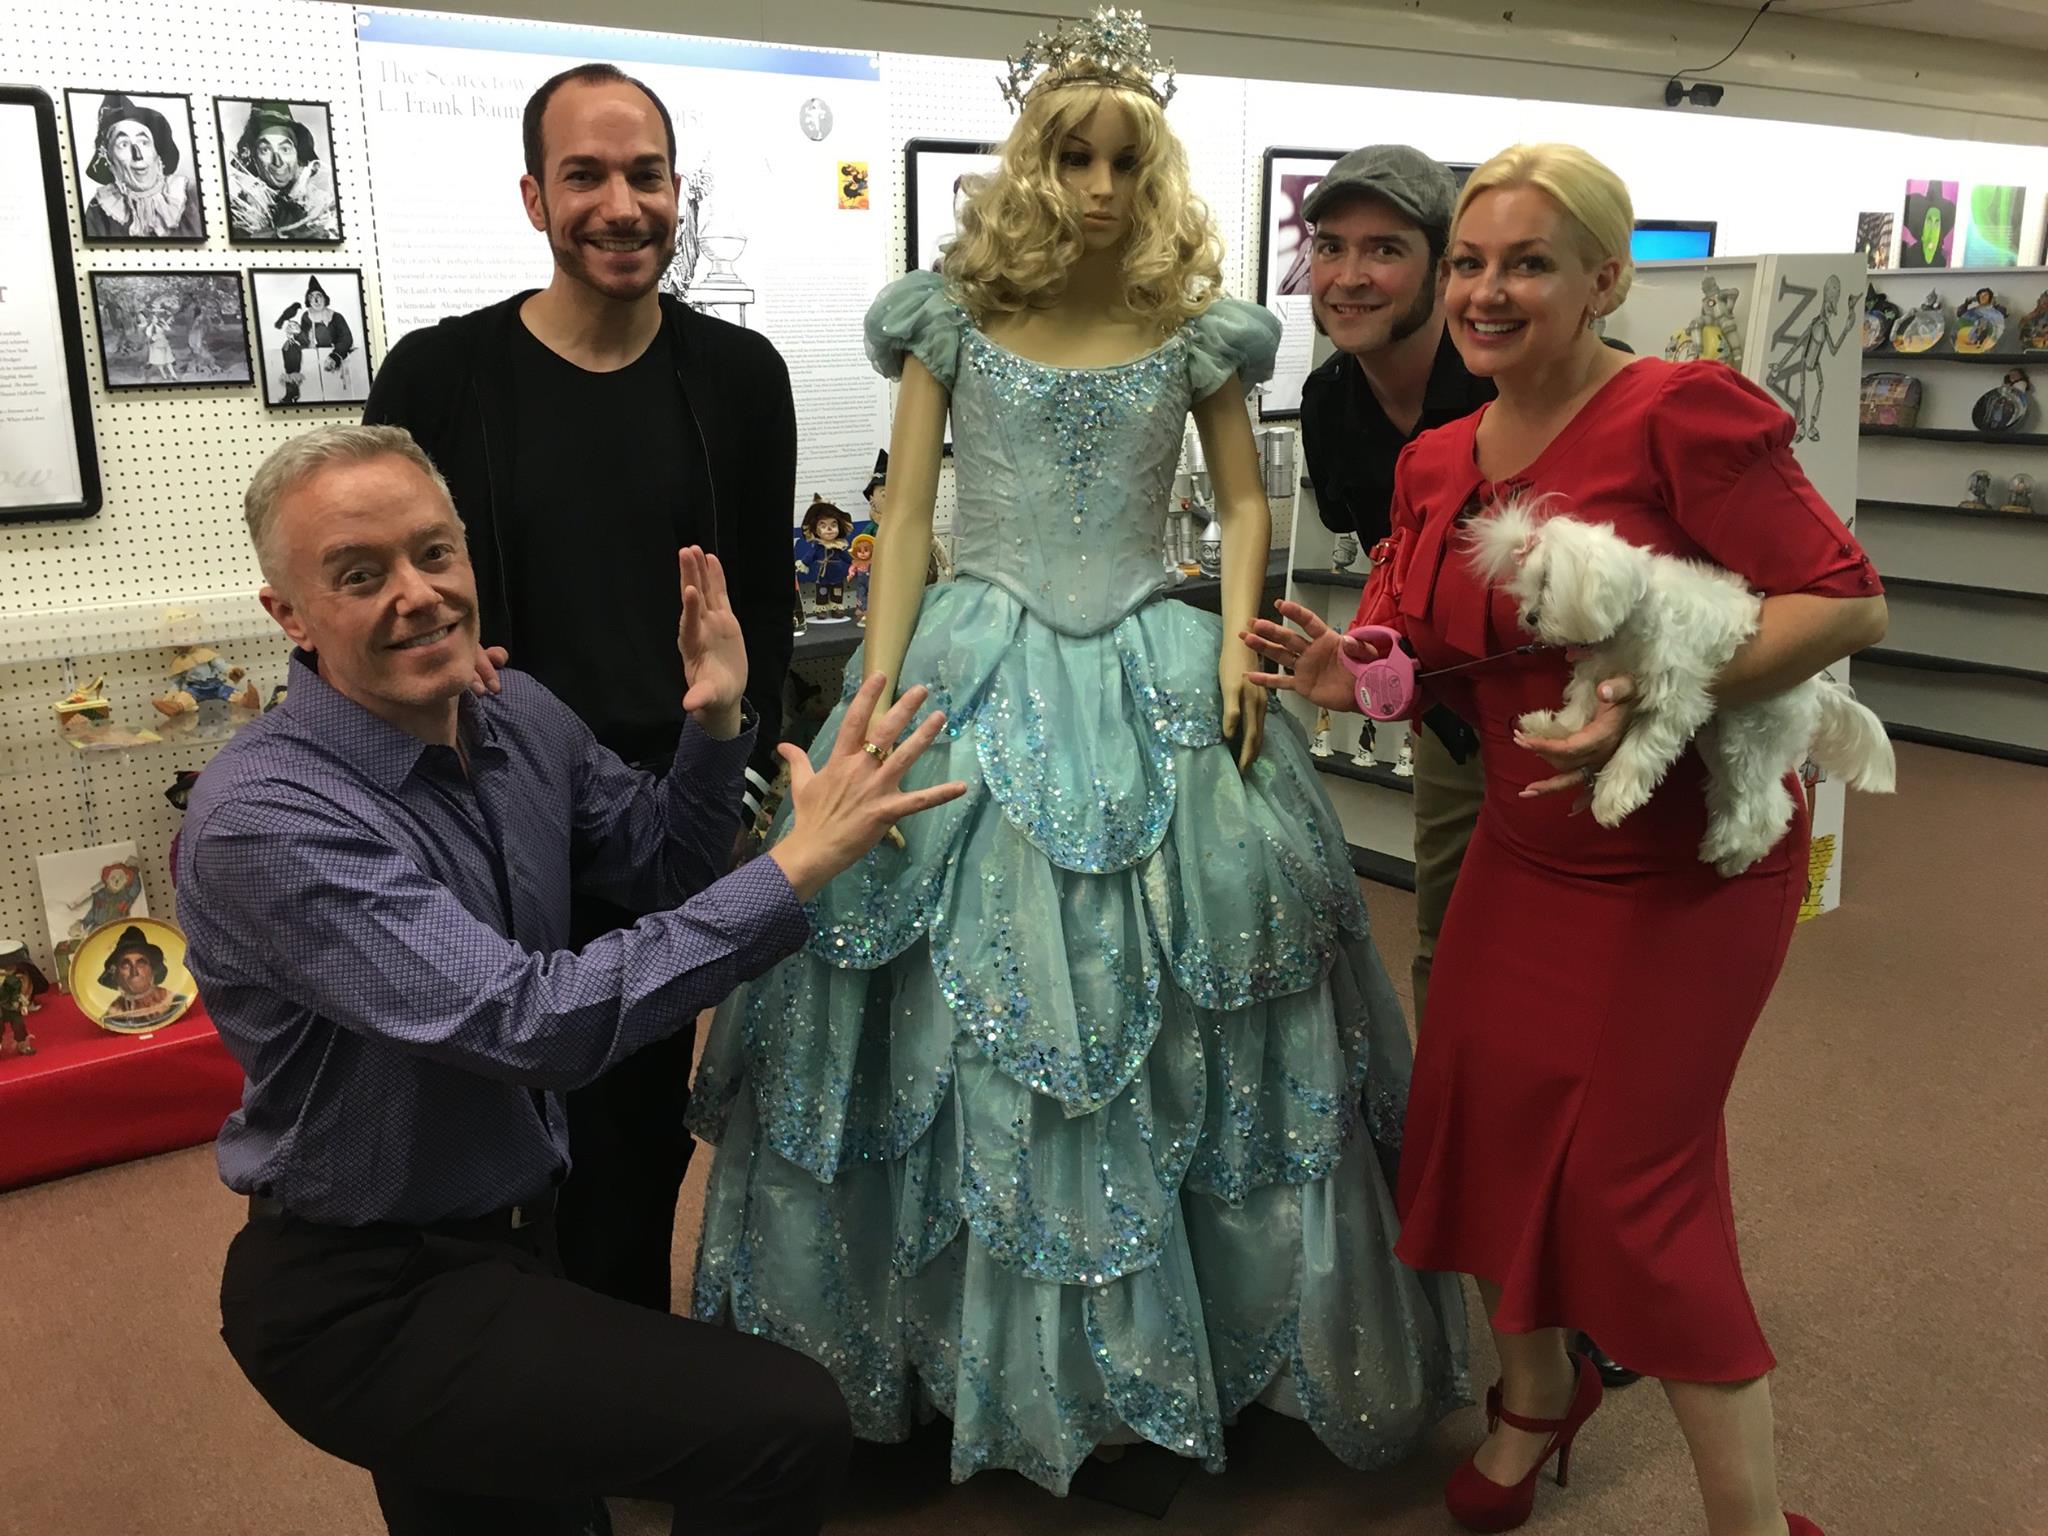 Fun with good friends and new friends as we oogle Glinda's dress from the Broadway production of "Wicked," on loan to the All Things Oz Museum for the next two months! (Left to right:) Paul Miles Schneider, Ryan Jay, Vincent Myrand, and Emma Ridley.